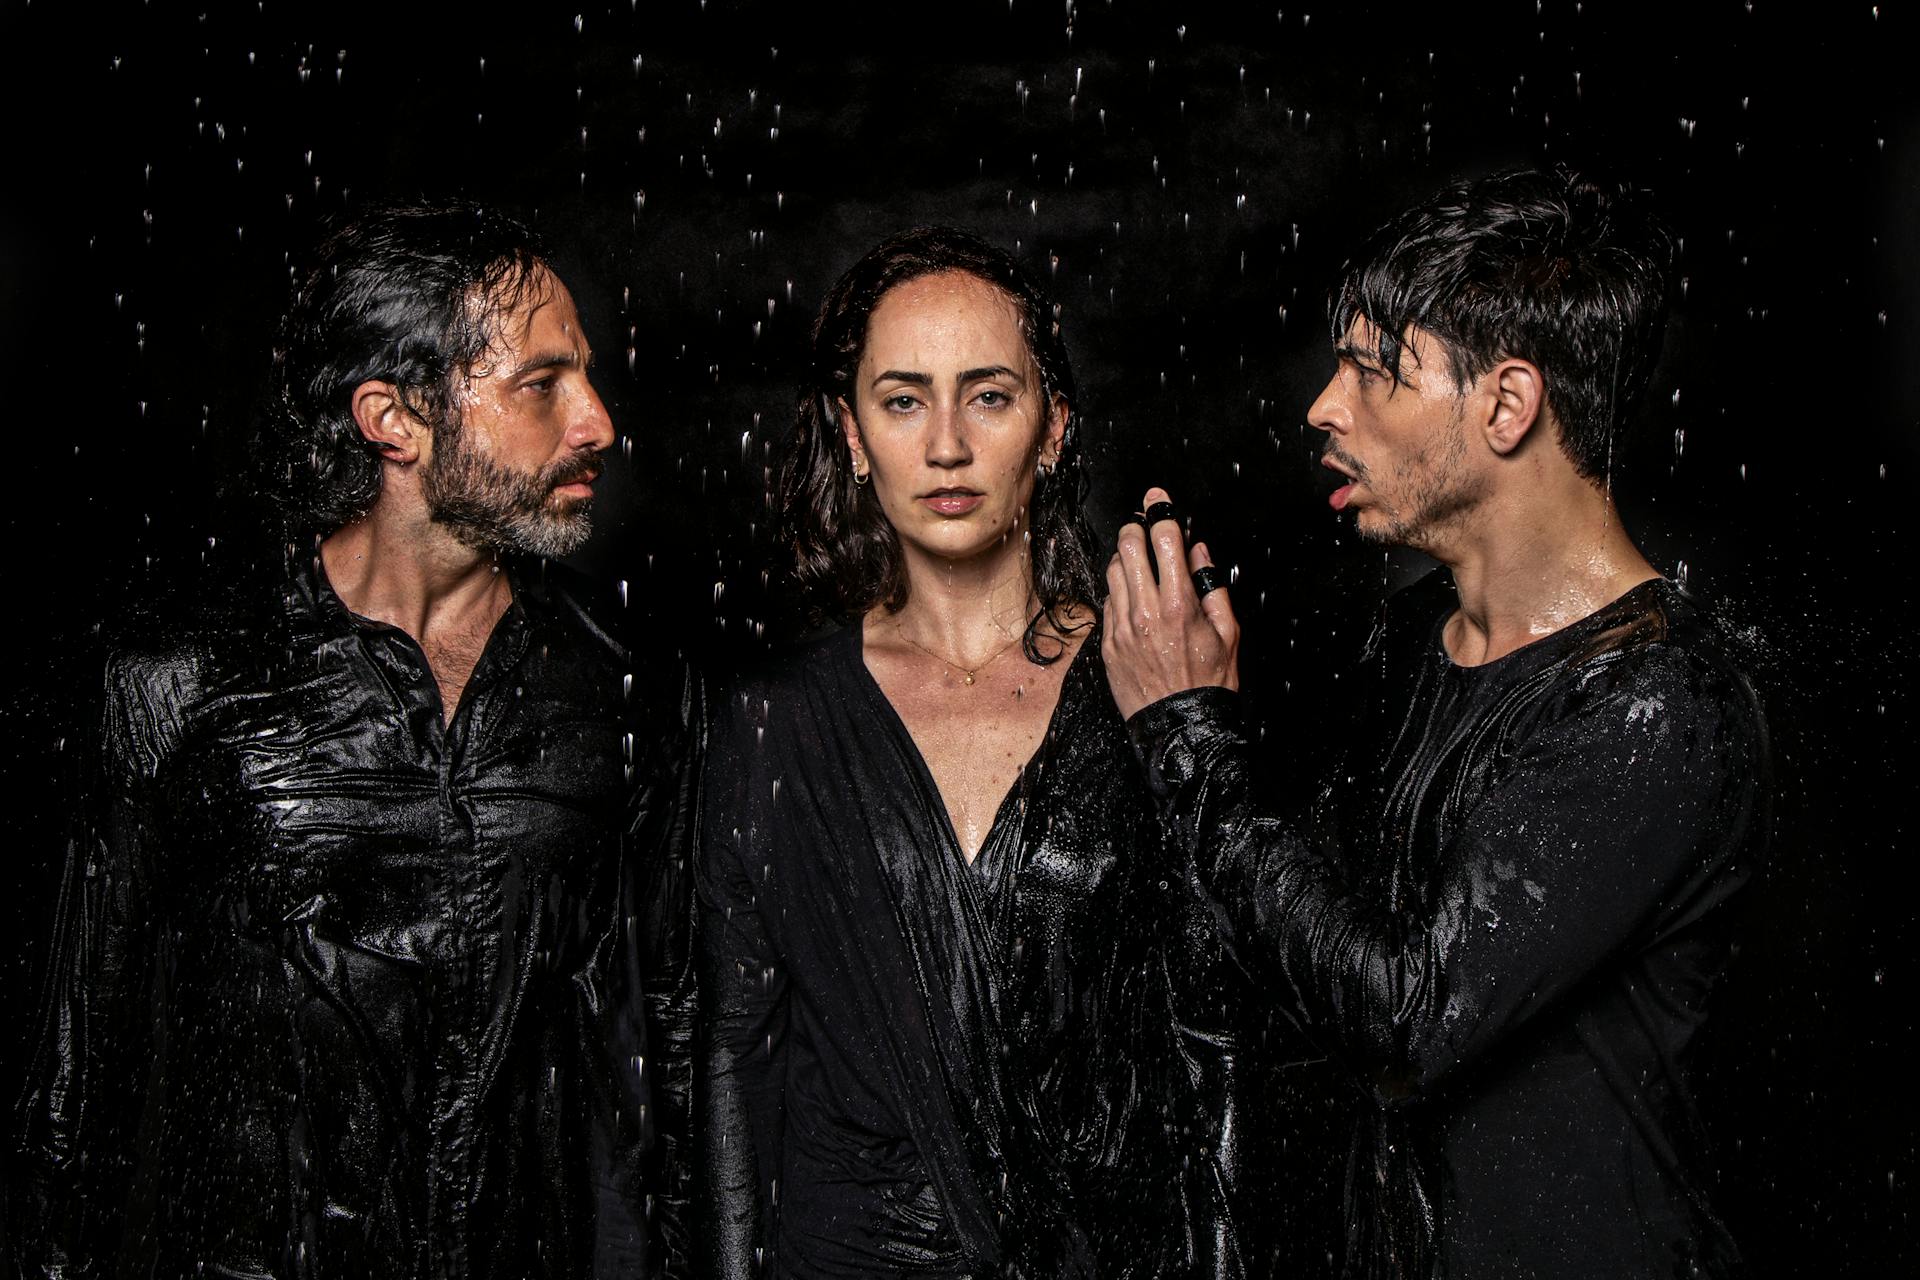 Photogenic talented artists wearing wet black clothes standing in studio under water drops